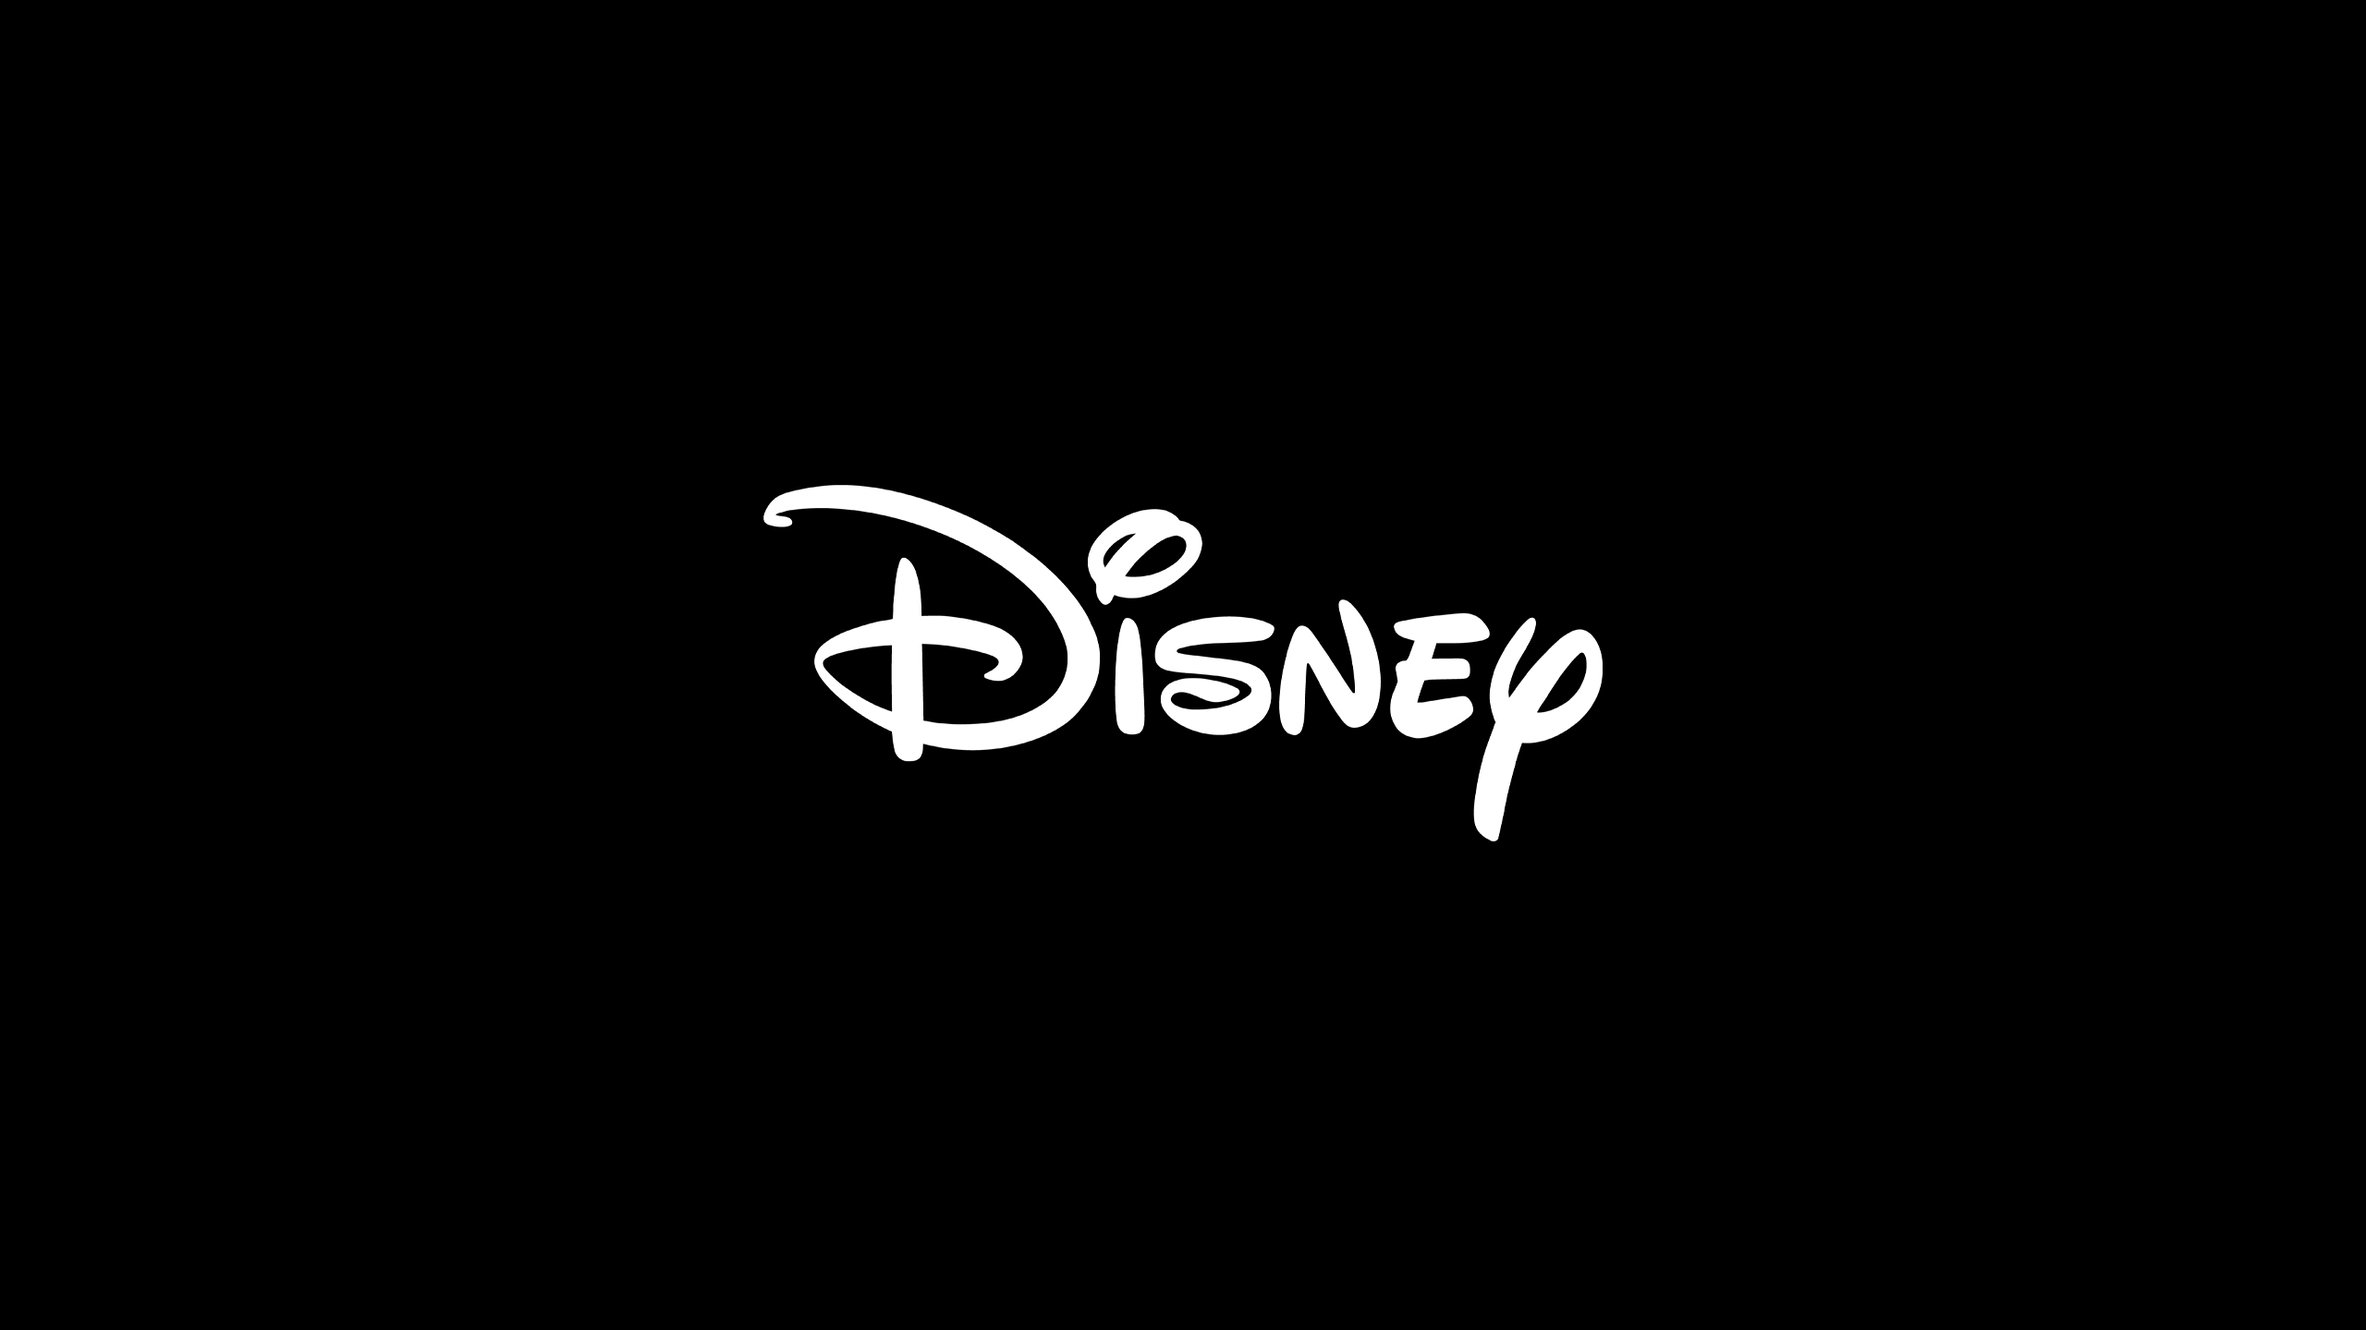 Casting Call for Disney Channel Show, Disney’s Magic Baking Show